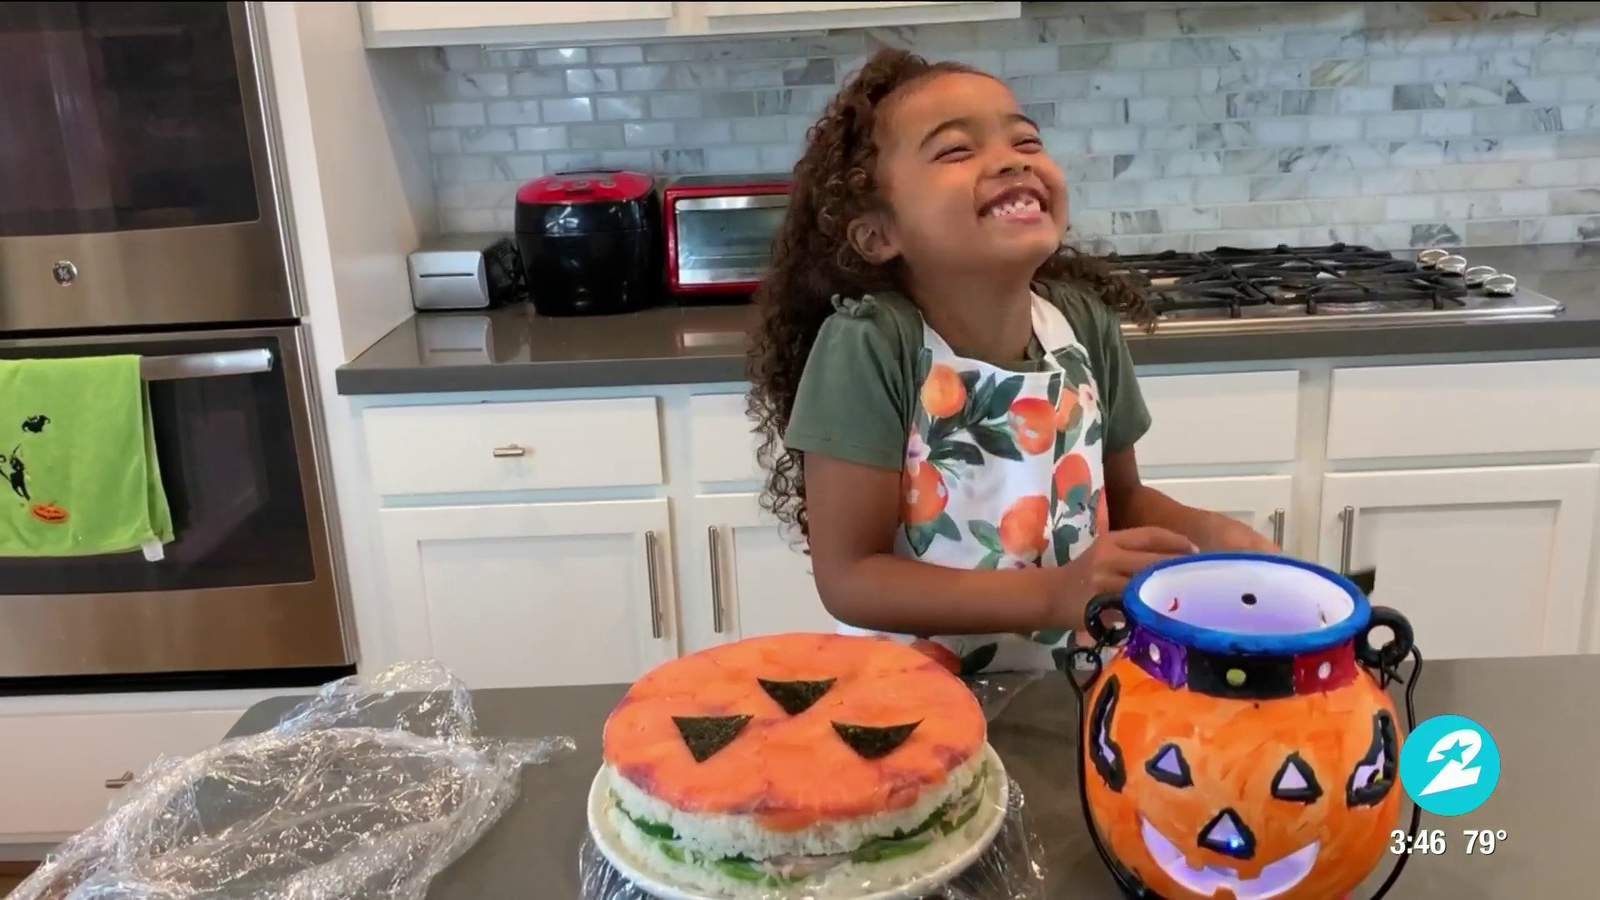 Adorable 5-year-old chef from Spring makes spooky ‘Sushi Pumpkin Cake’ for Halloween